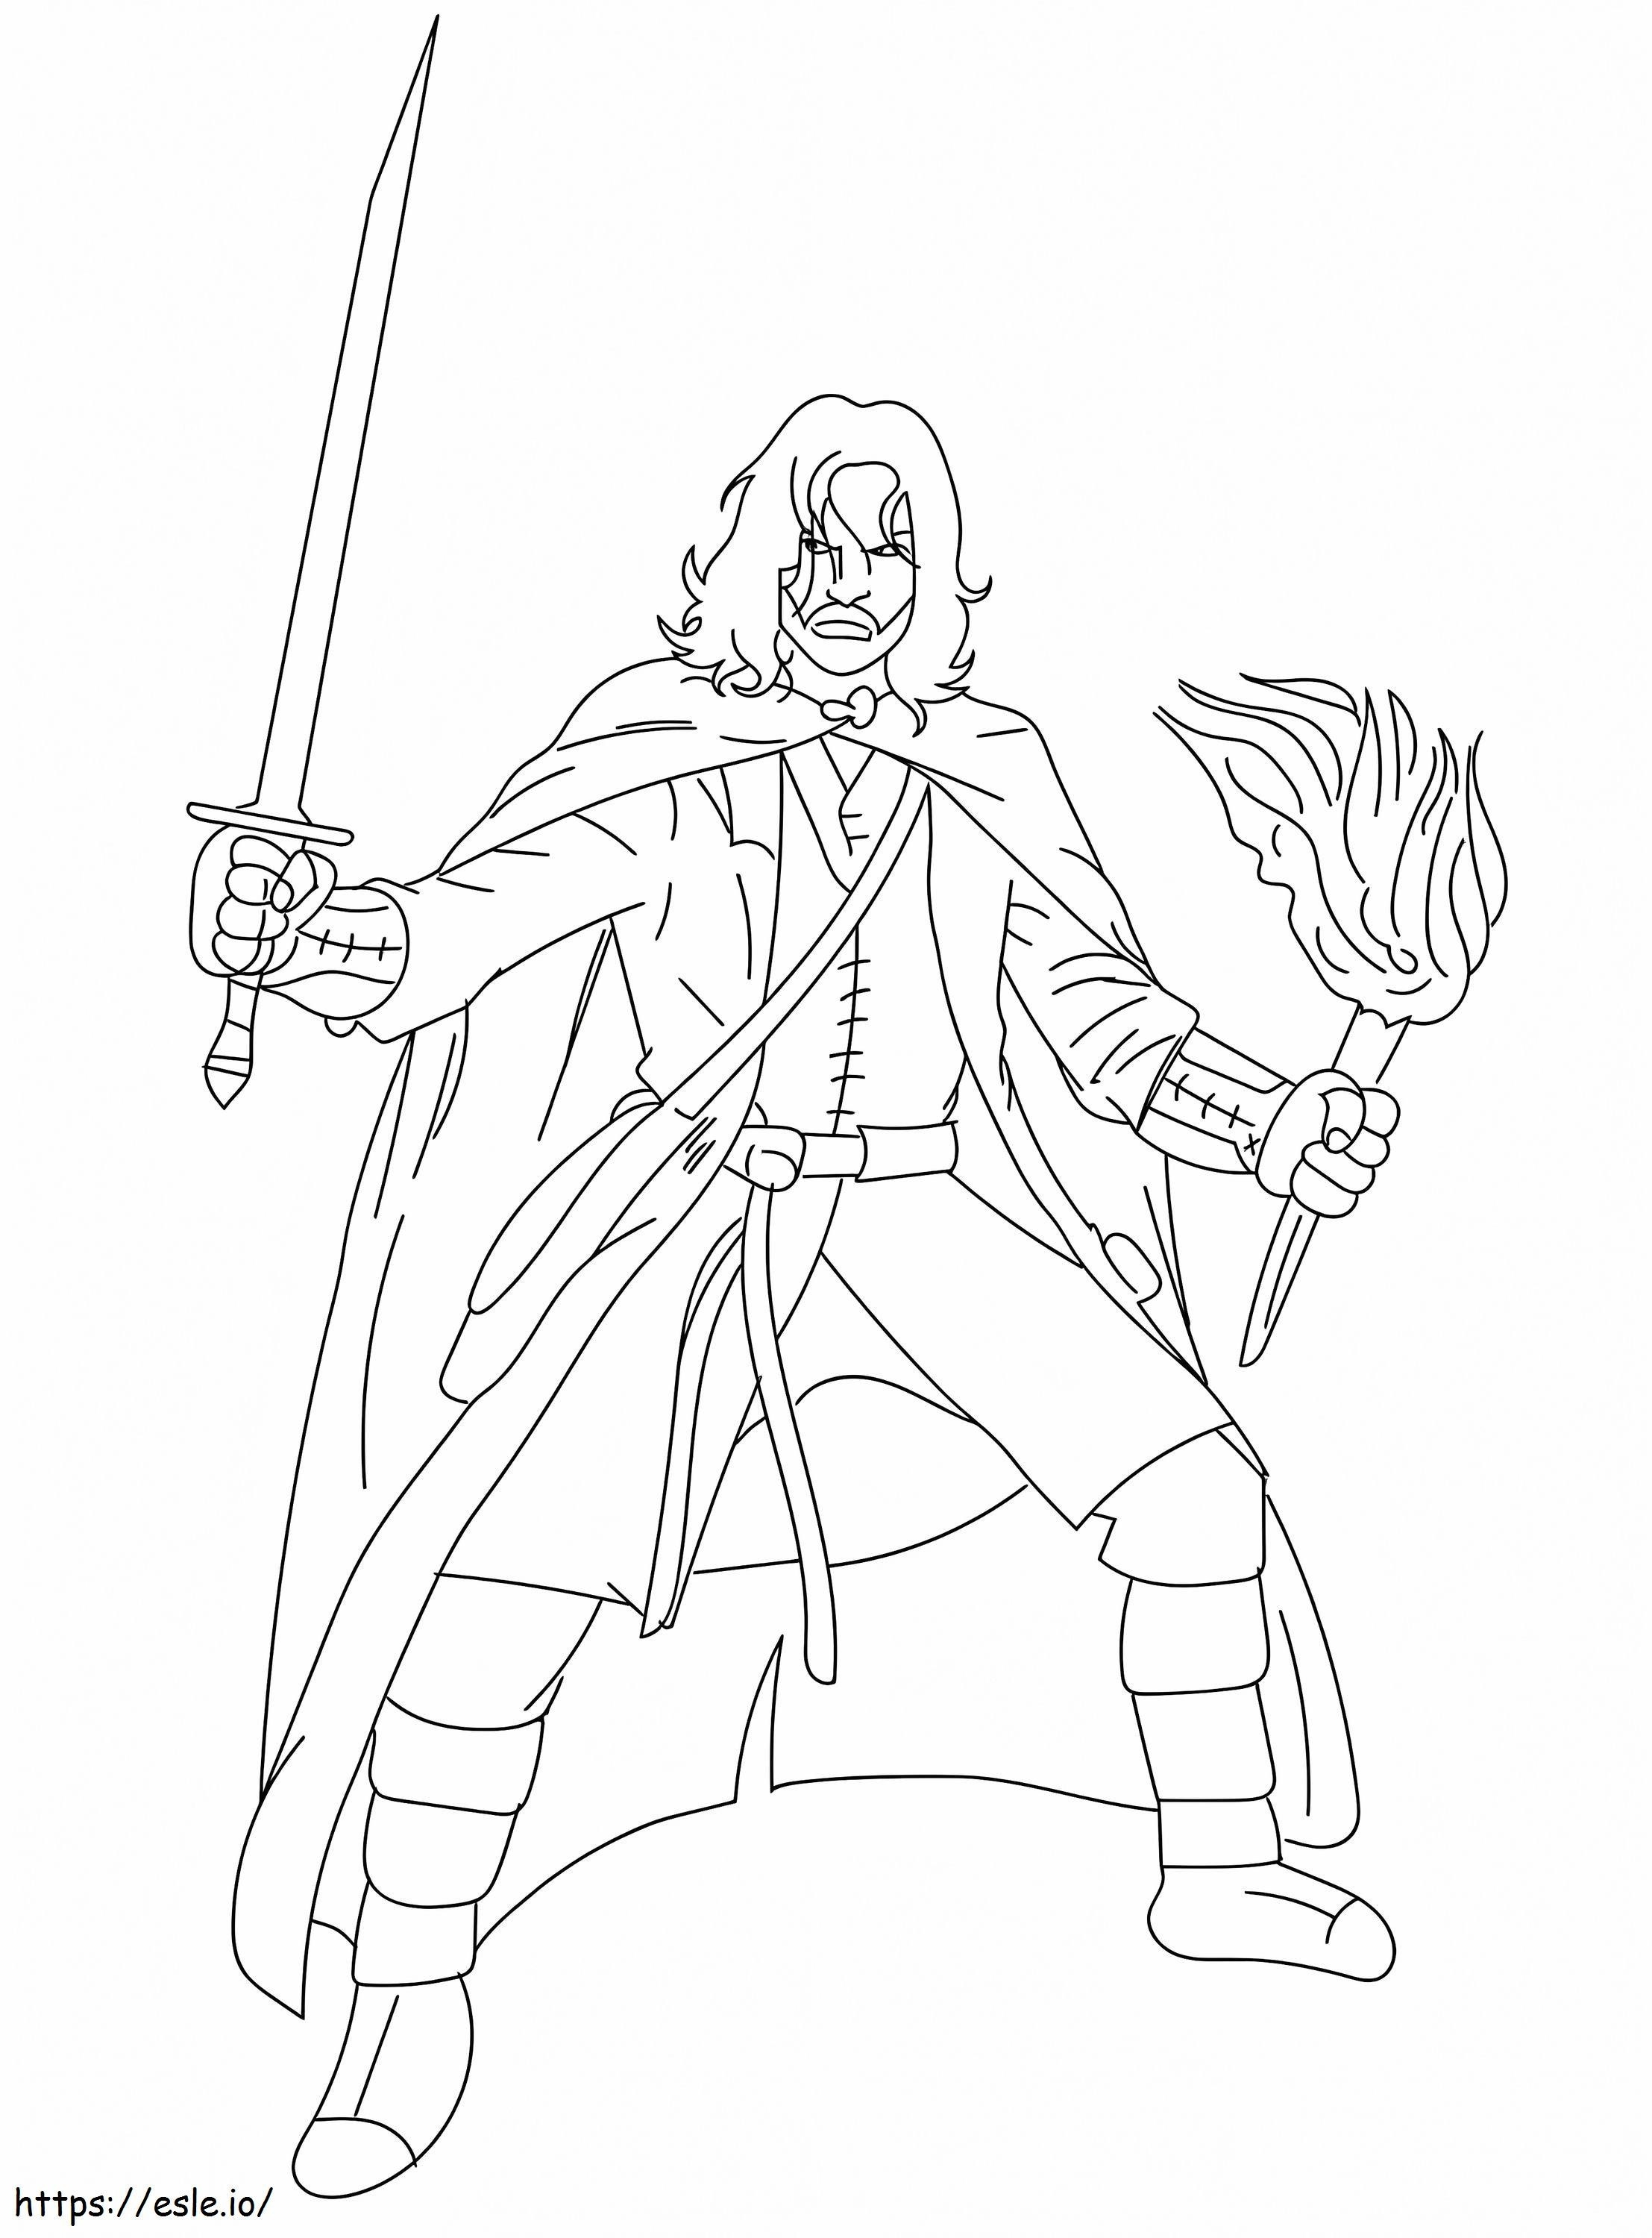 Aragorn coloring page